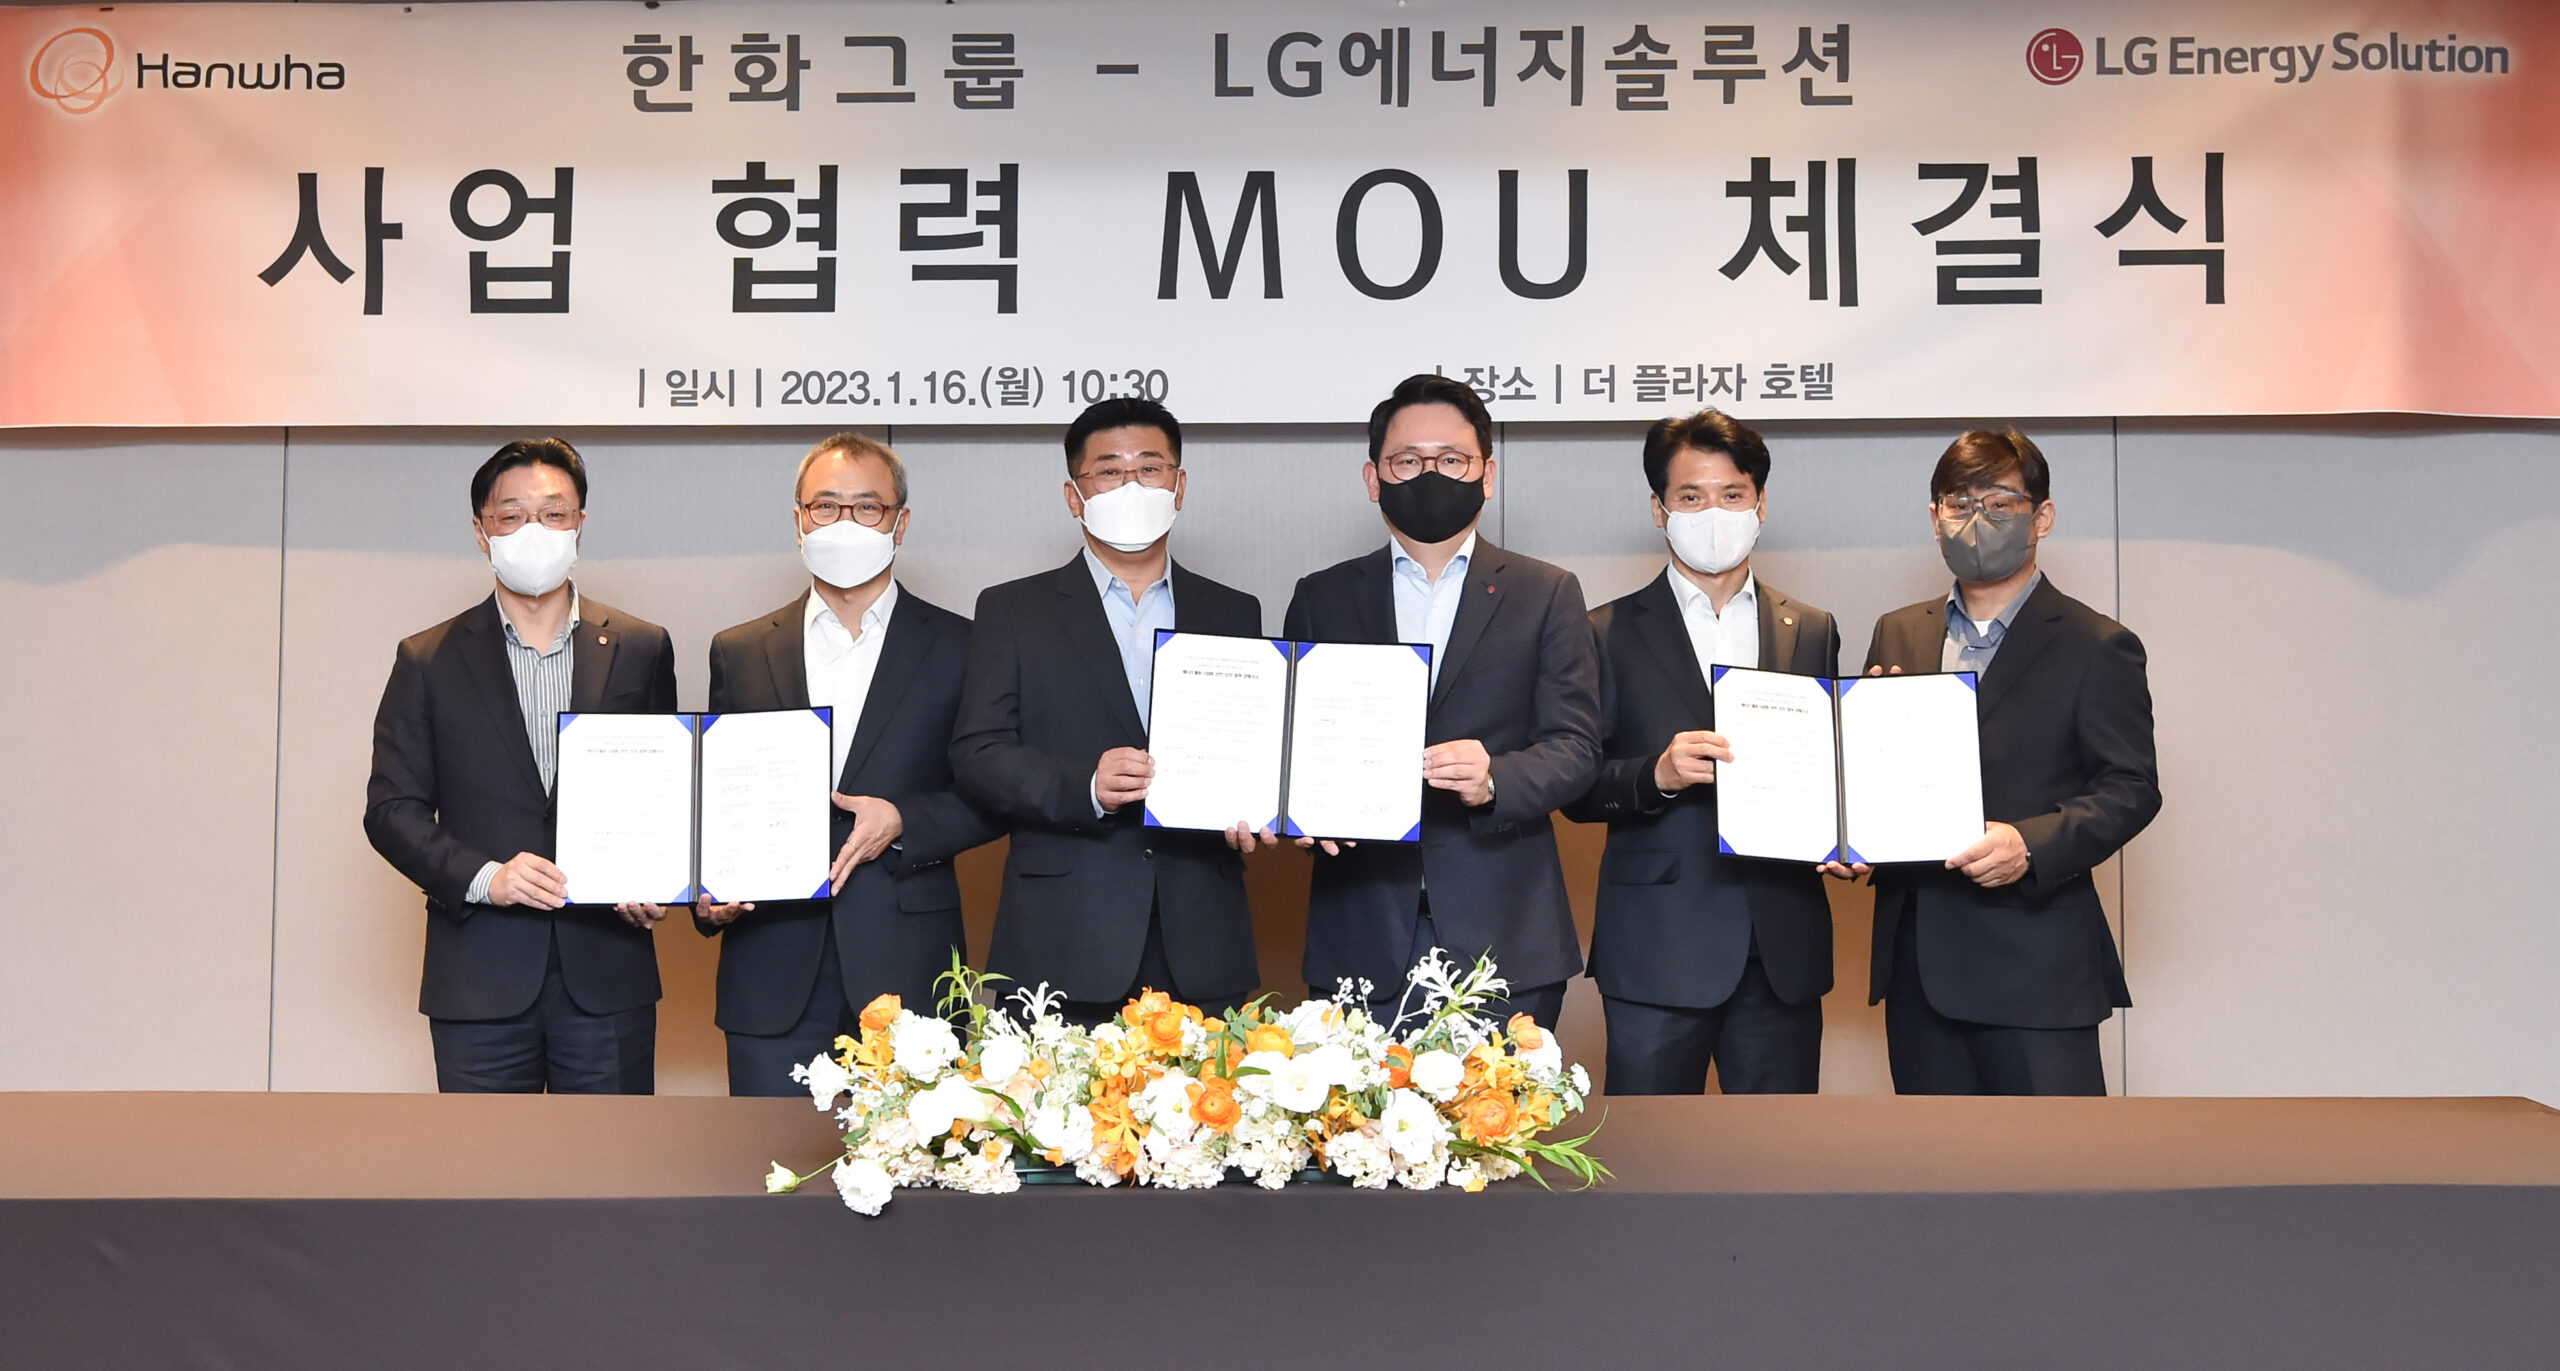 lg-energy-solution-partners-with-hanwha-group-for-extensive-cooperation-in-battery-business_1.jpg